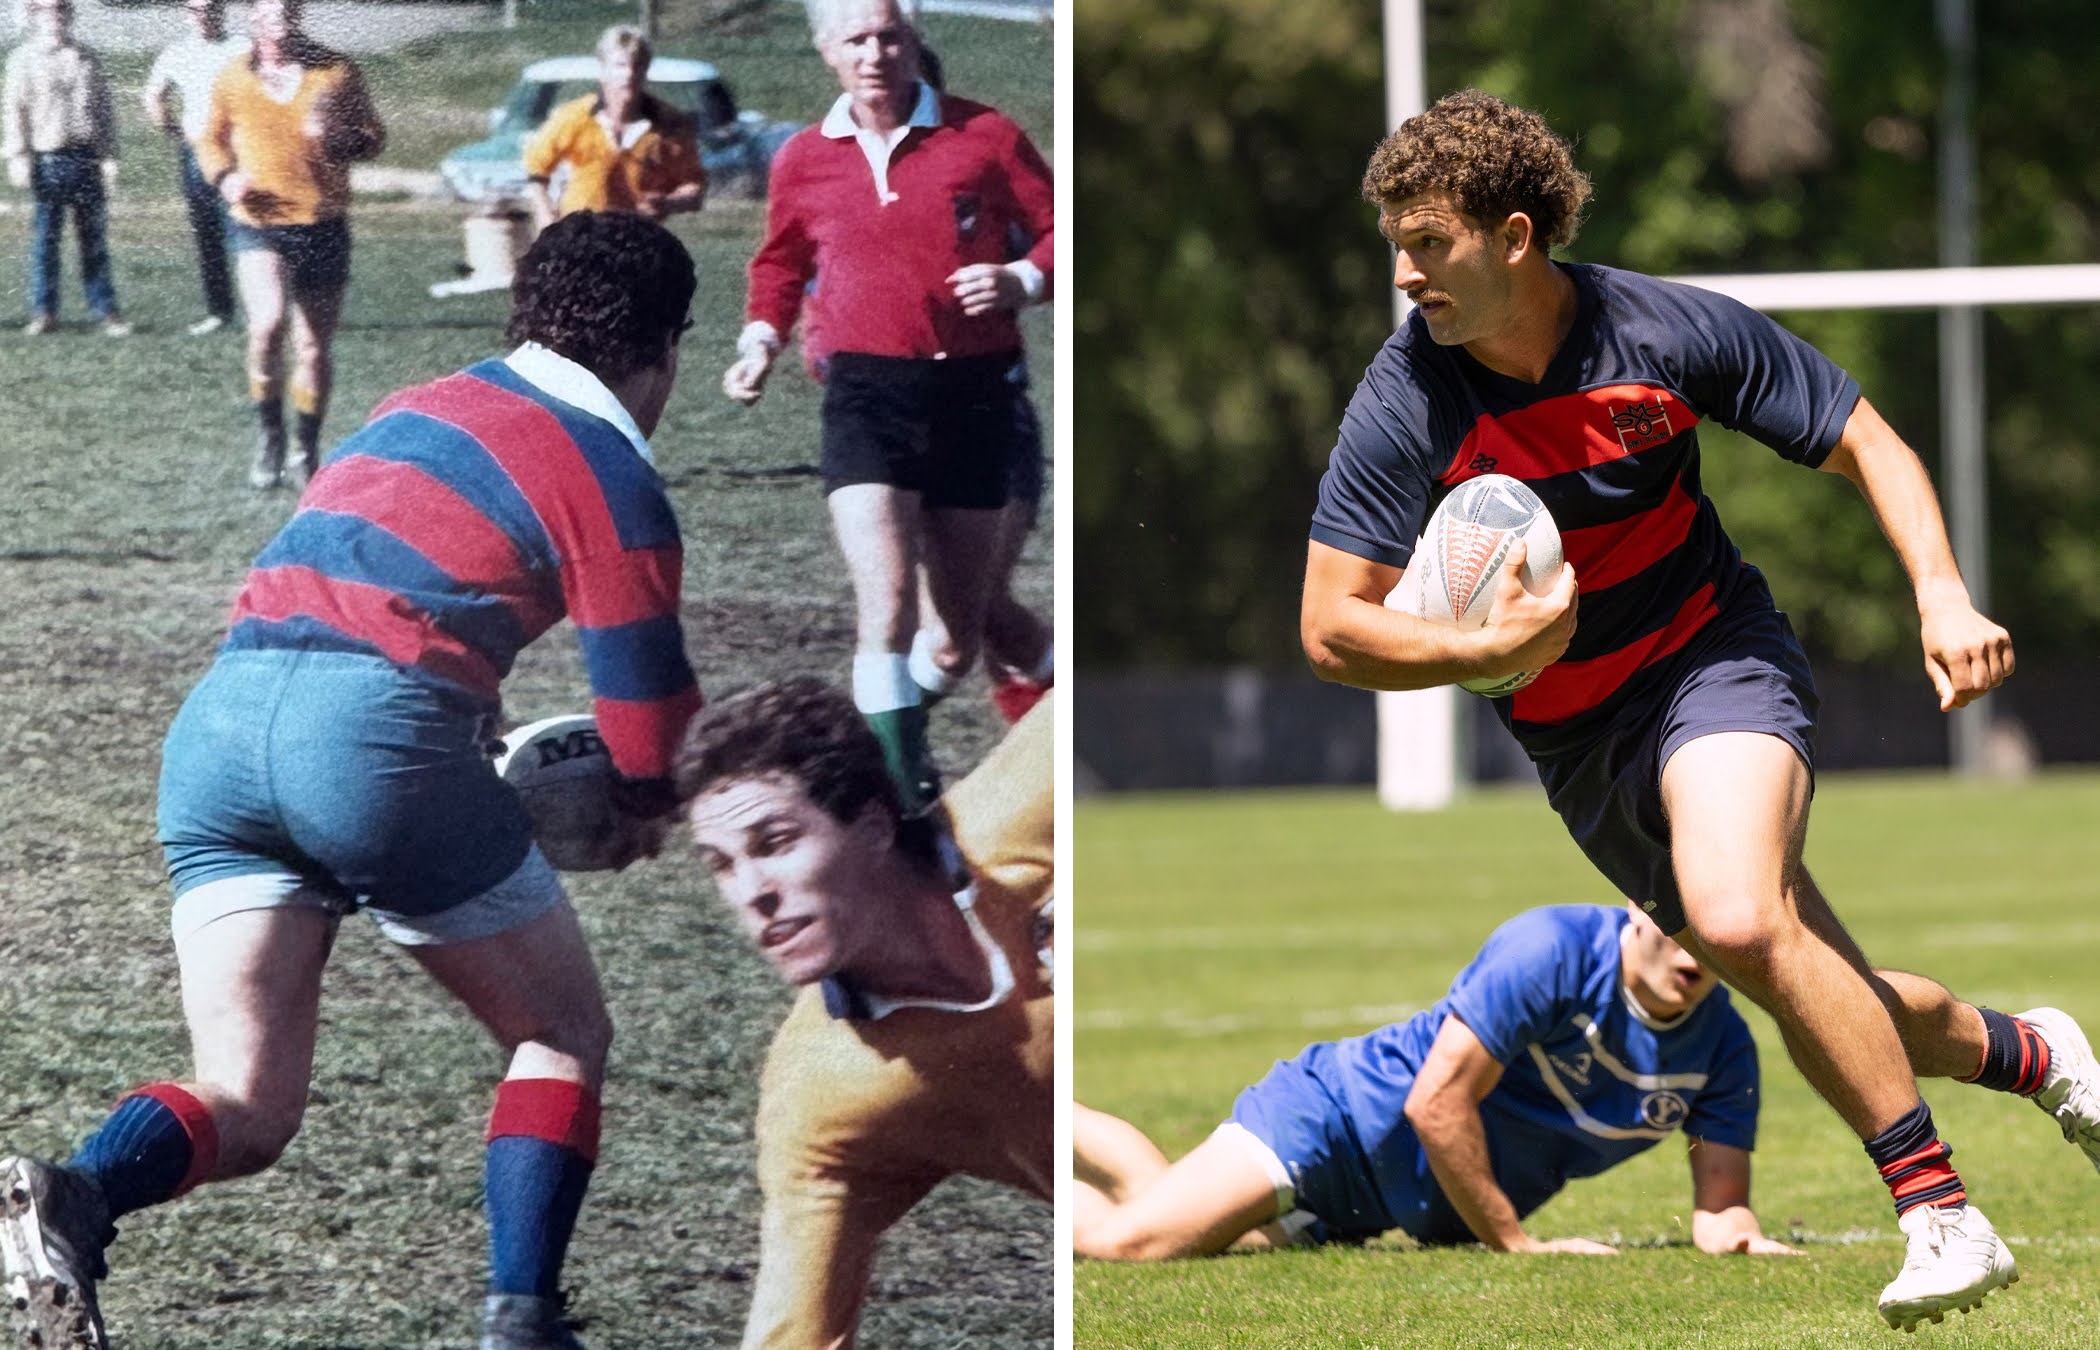 Break away with the ball: Marty Storti ‘85 MA ‘89 on the left dodges the defender while bringing the ball up the field. Erich Storti ‘23 MA ‘24 pictured on the right mimics his father's skills and escapes the defender. / Photos provided courtesy of Storti Family & Club Sports